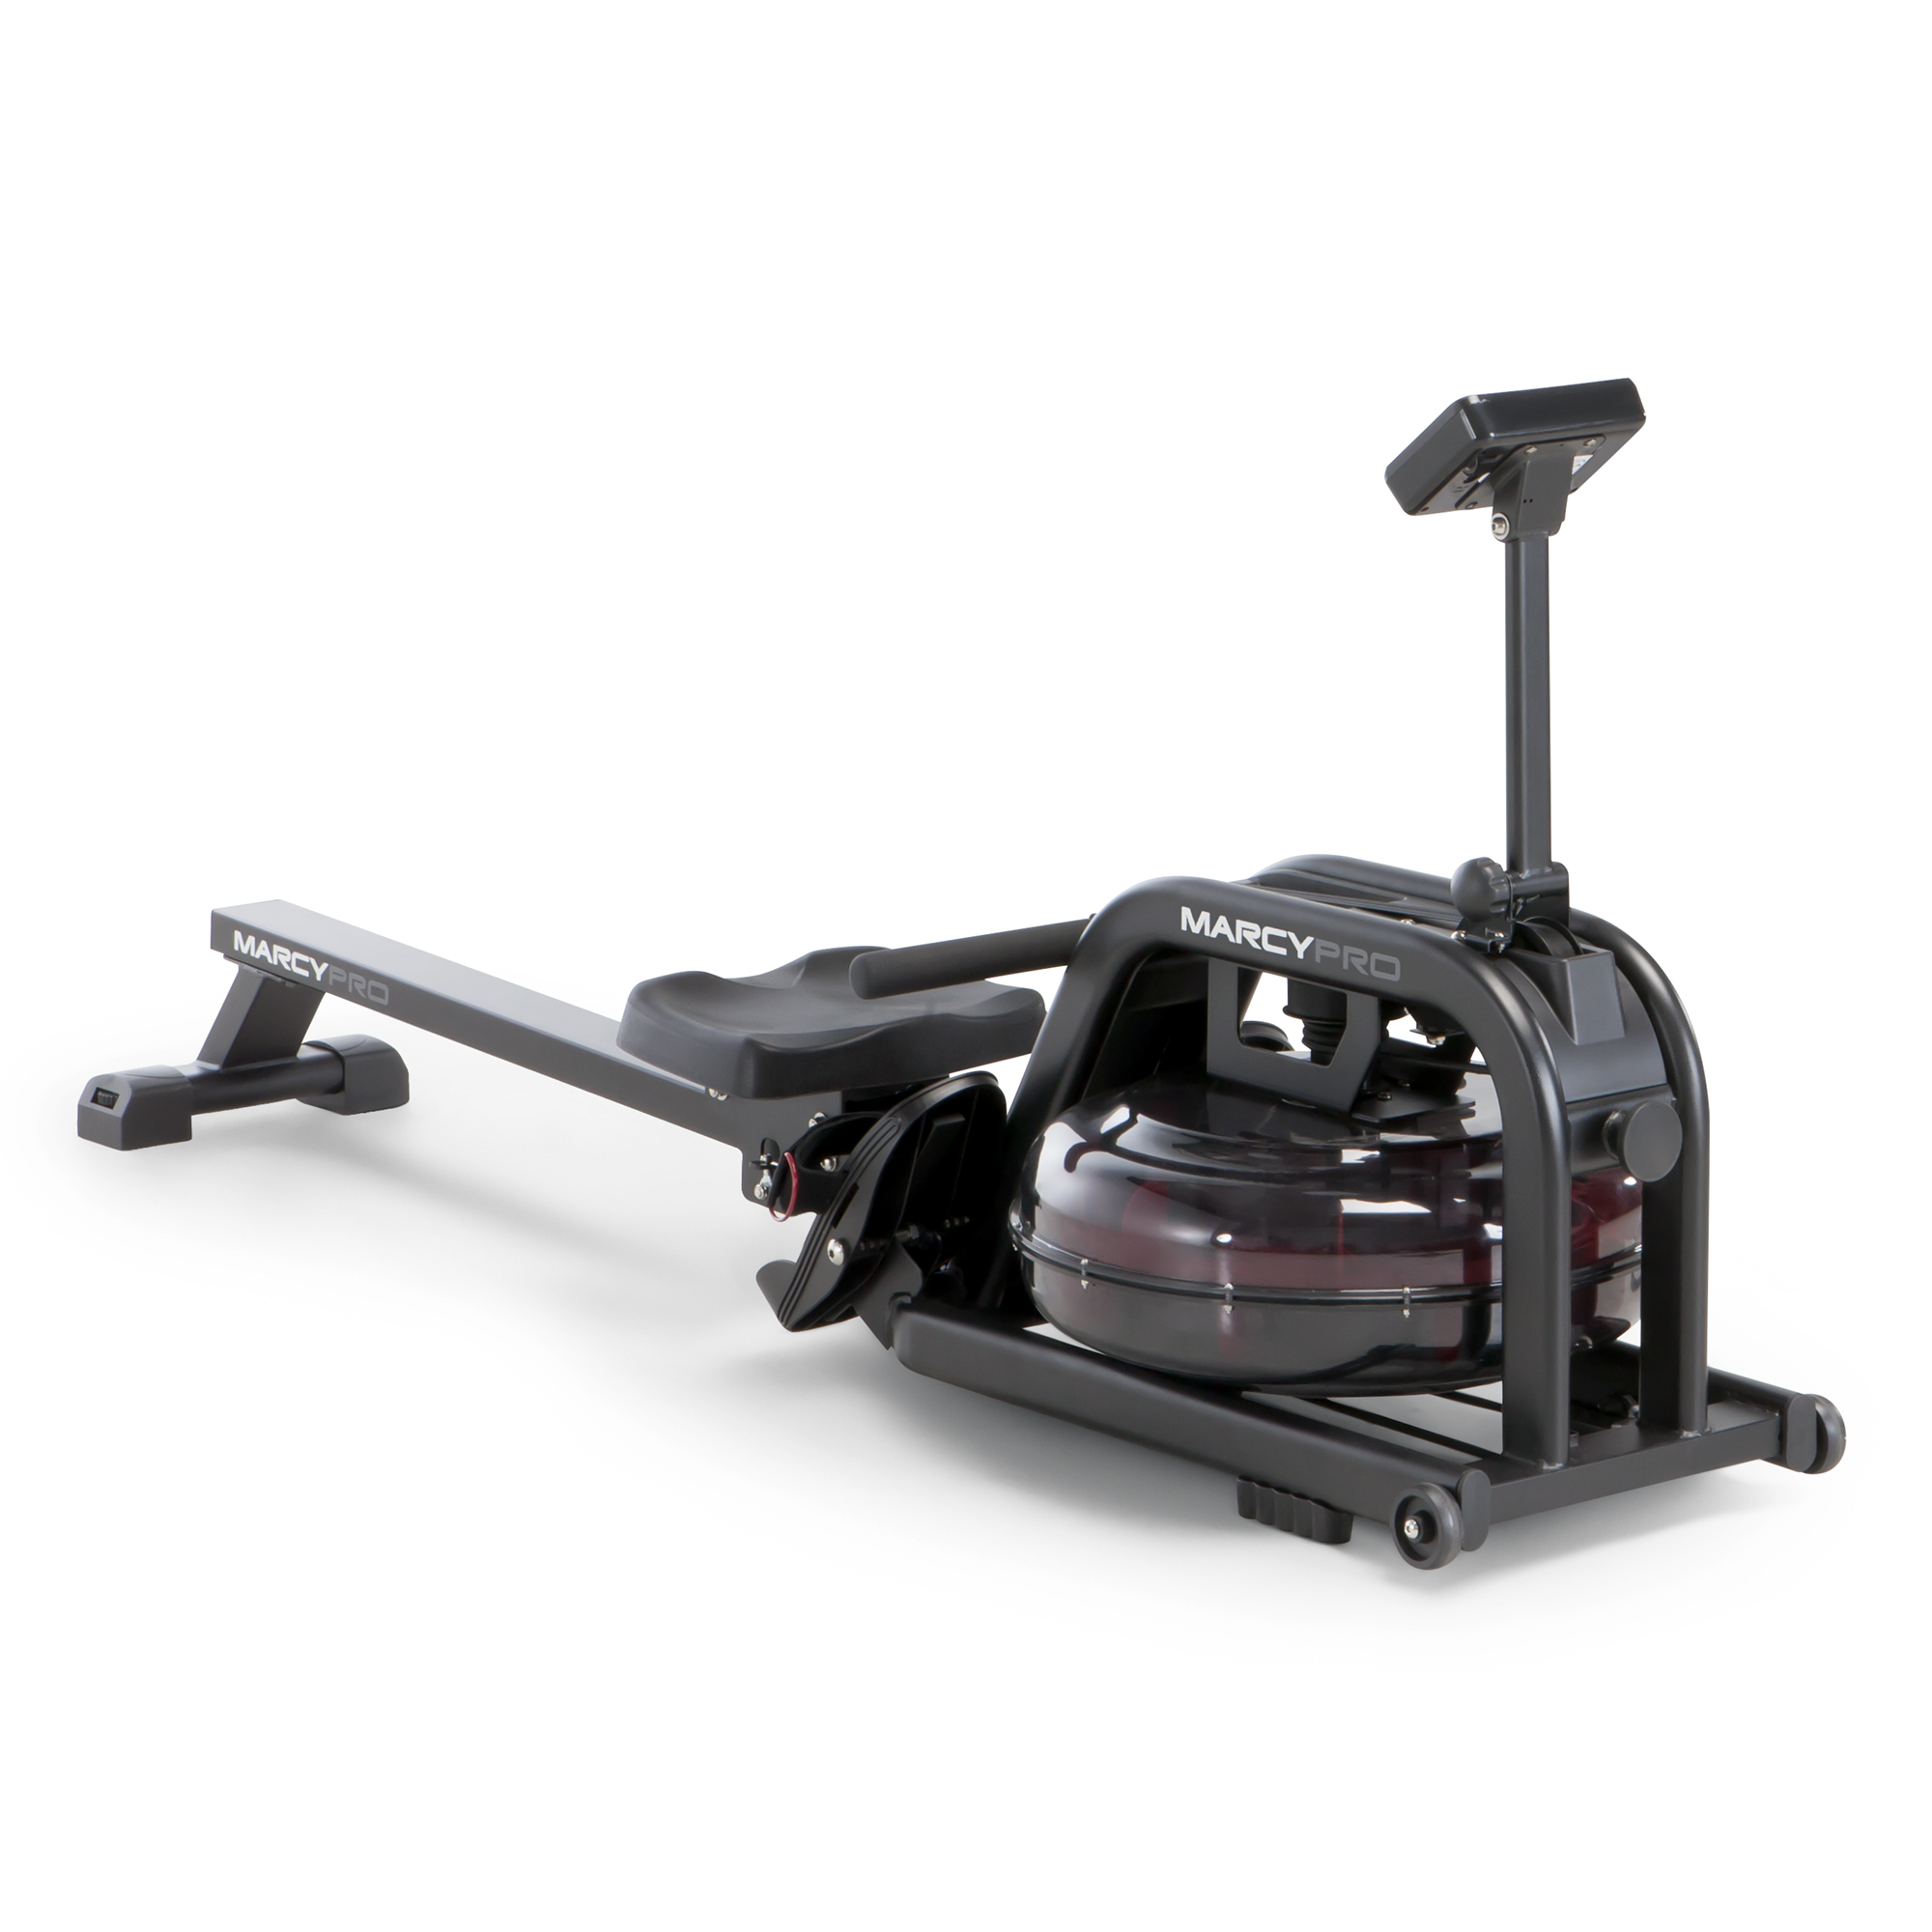 Marcy Pro Water Rower NS-6070RW - image 1 of 6